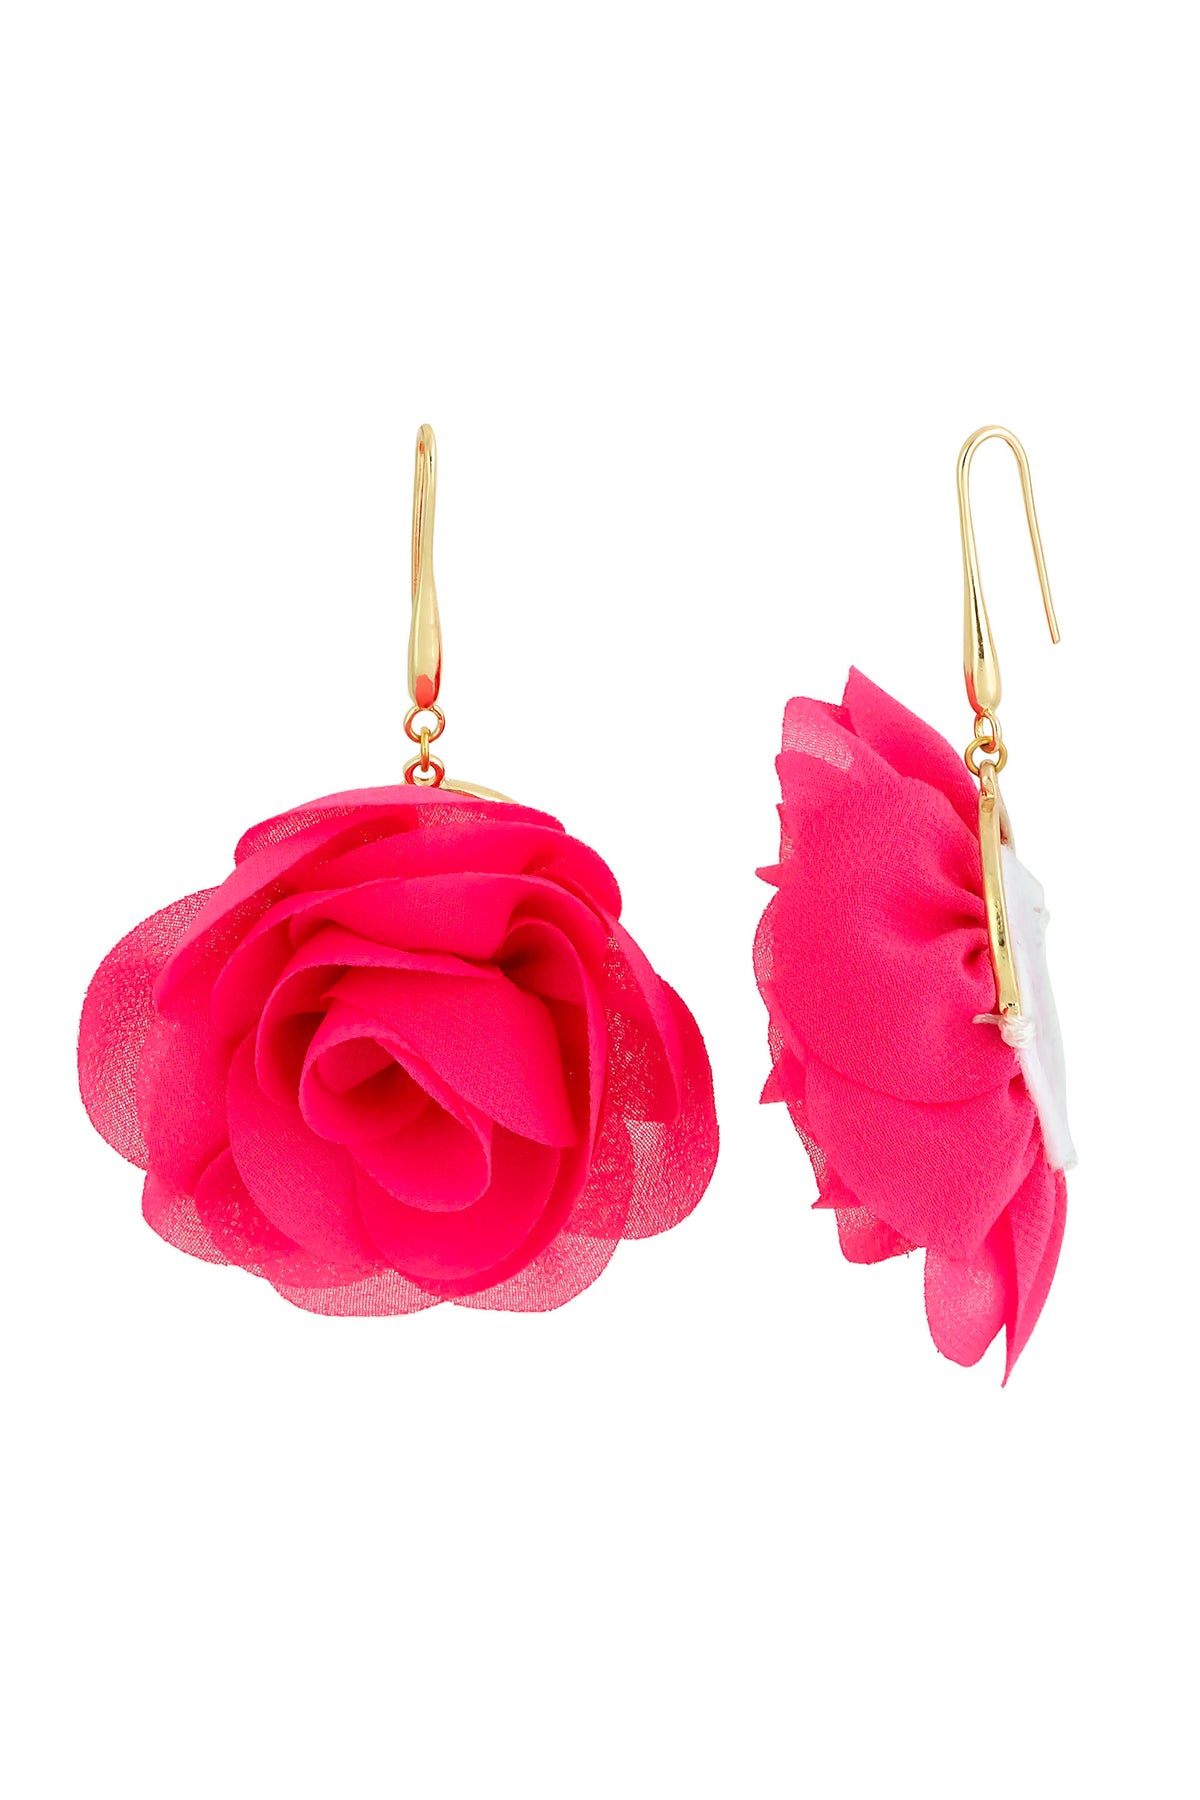 Dauplaise Jewelry - Enchanting Pink Blossom Drop Earrings